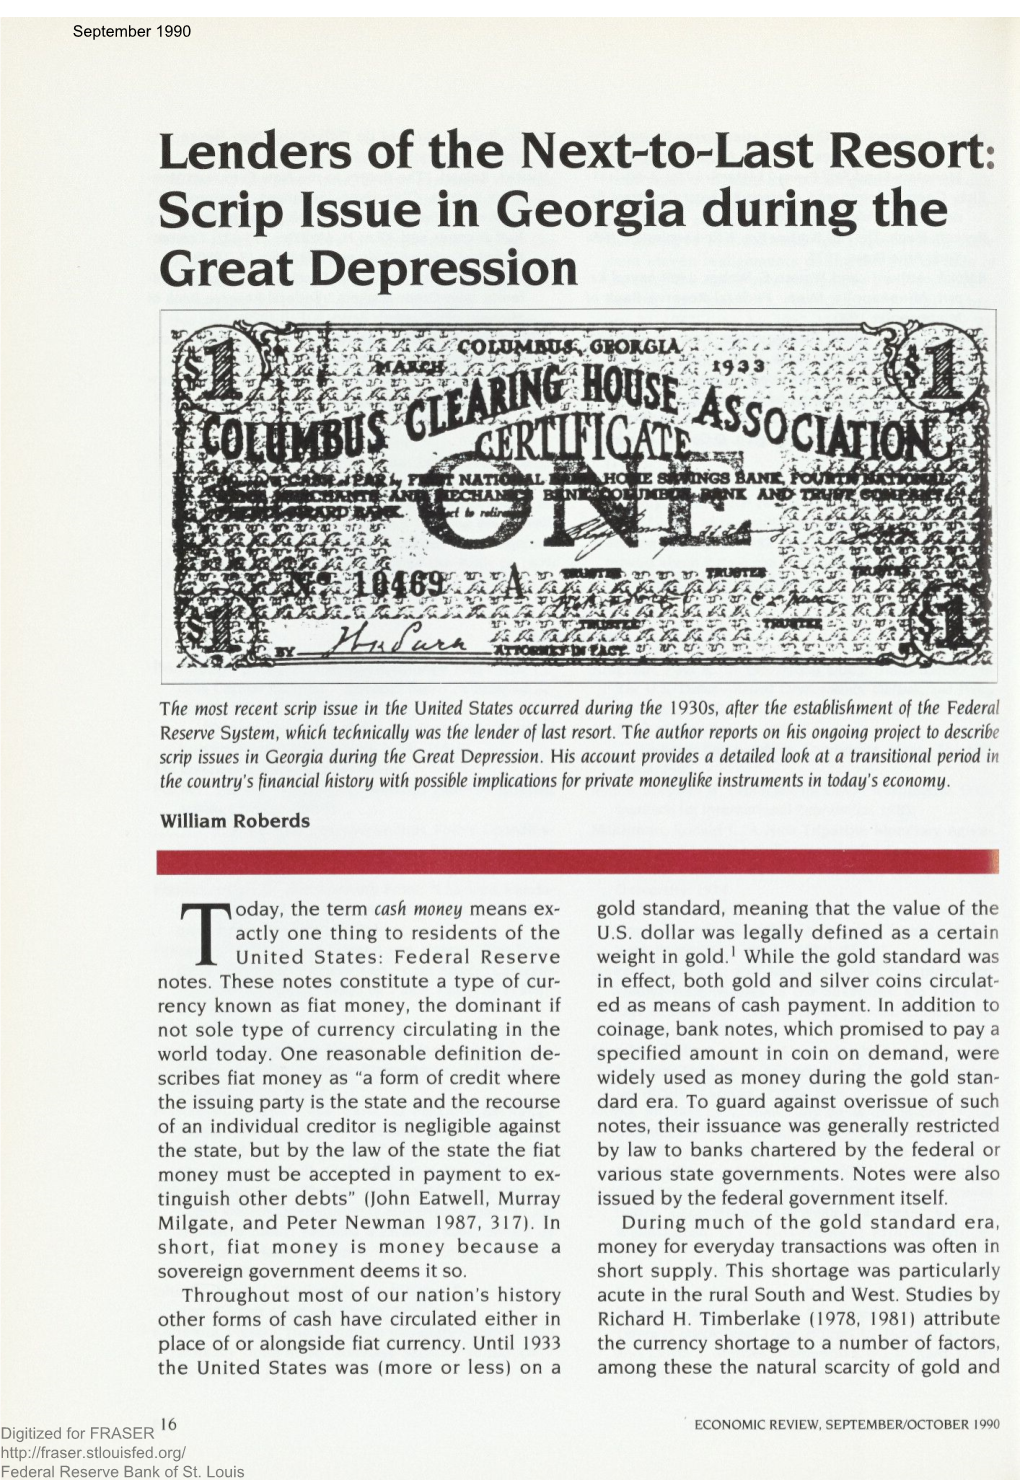 Scrip Issue in Georgia During the Great Depression